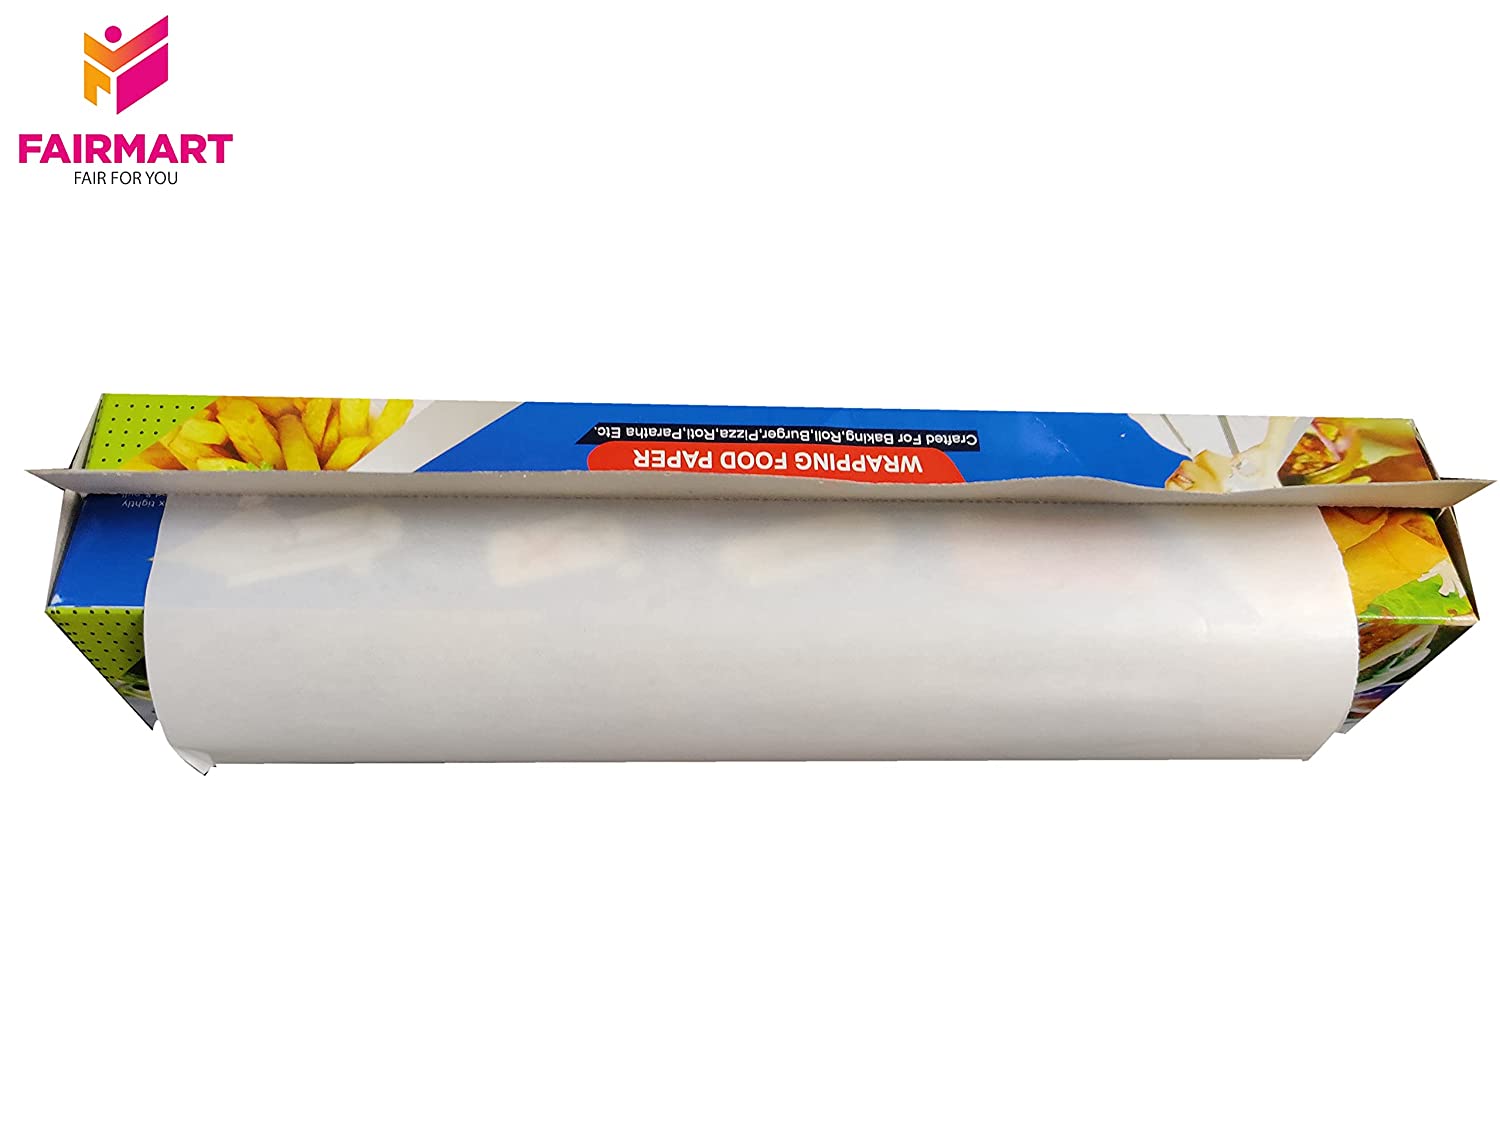 Multi purpose food wrap paper,/Roti Wrap paper/Wrapping roll Paper,  parchment paper, Butter paper, 20 meter